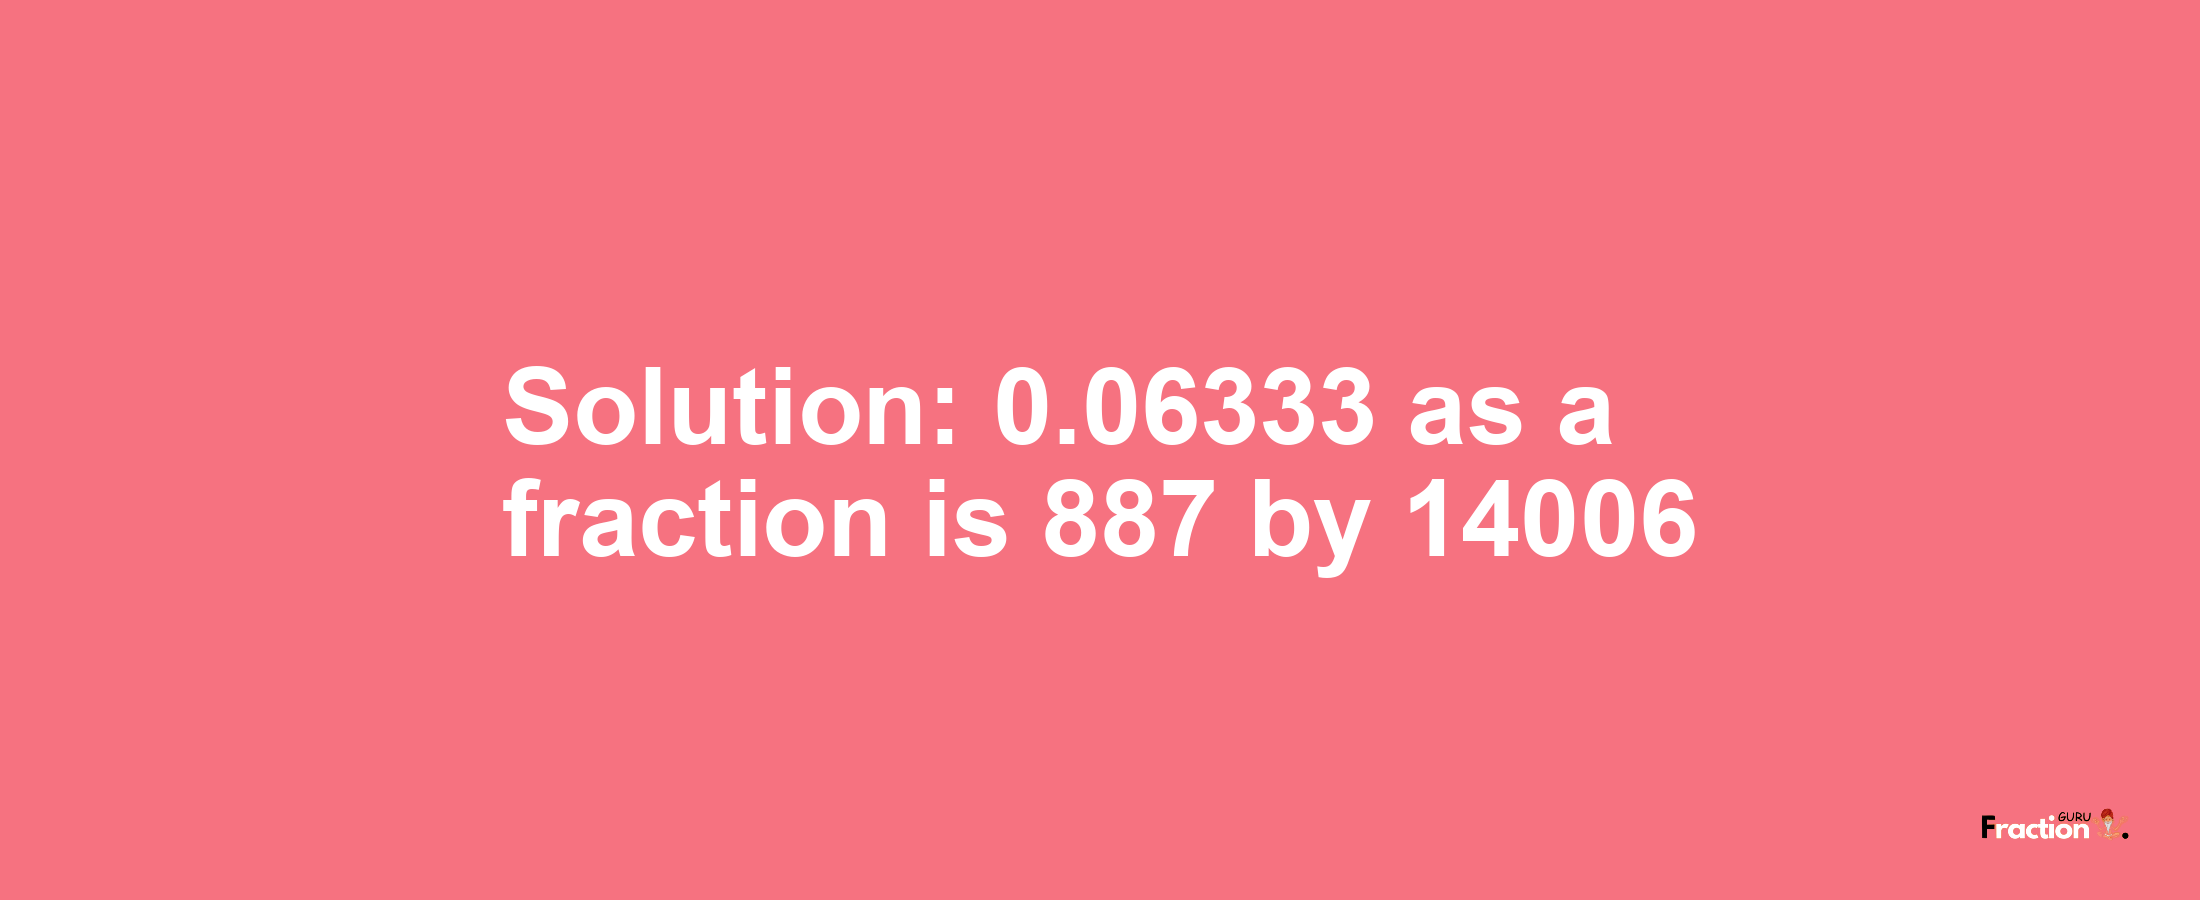 Solution:0.06333 as a fraction is 887/14006